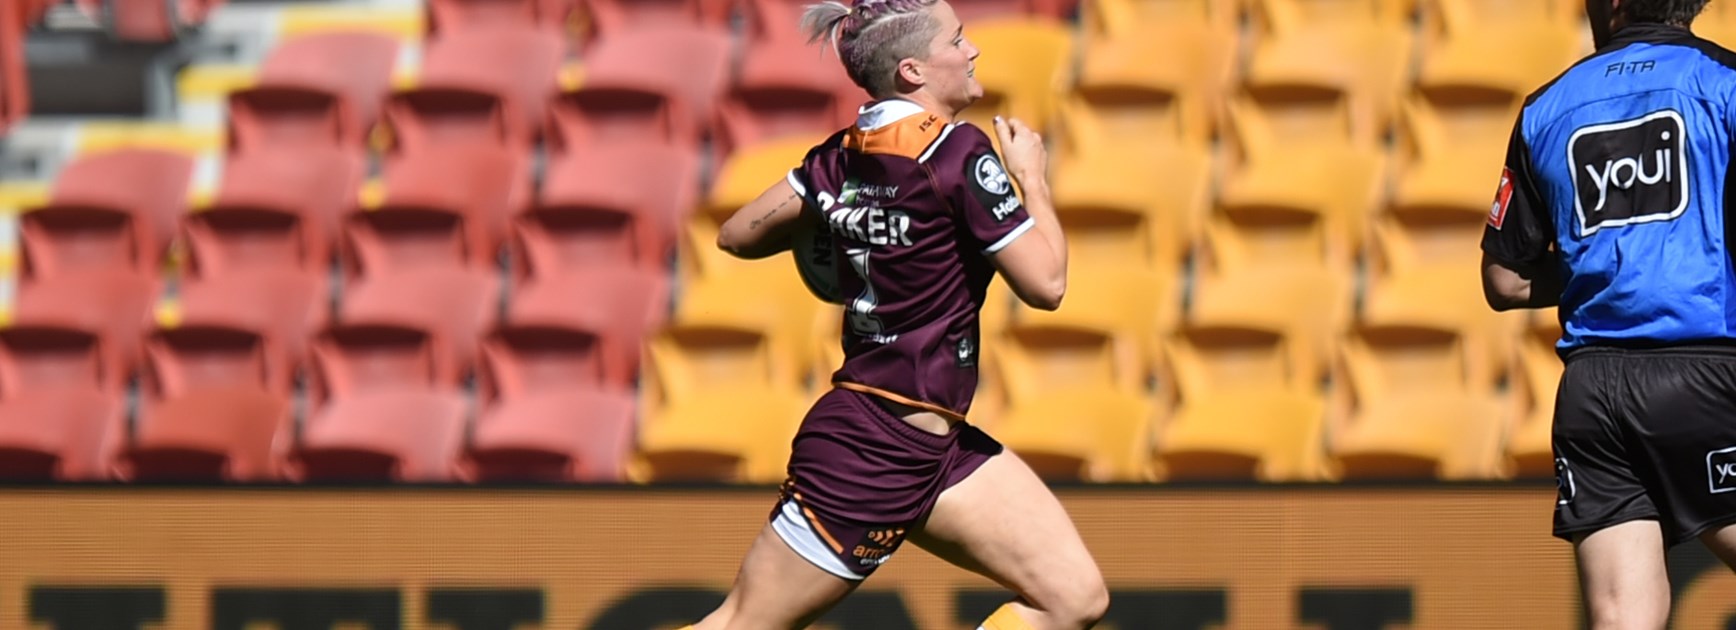 NRL Holden Women's Premiership: rules and matches summary